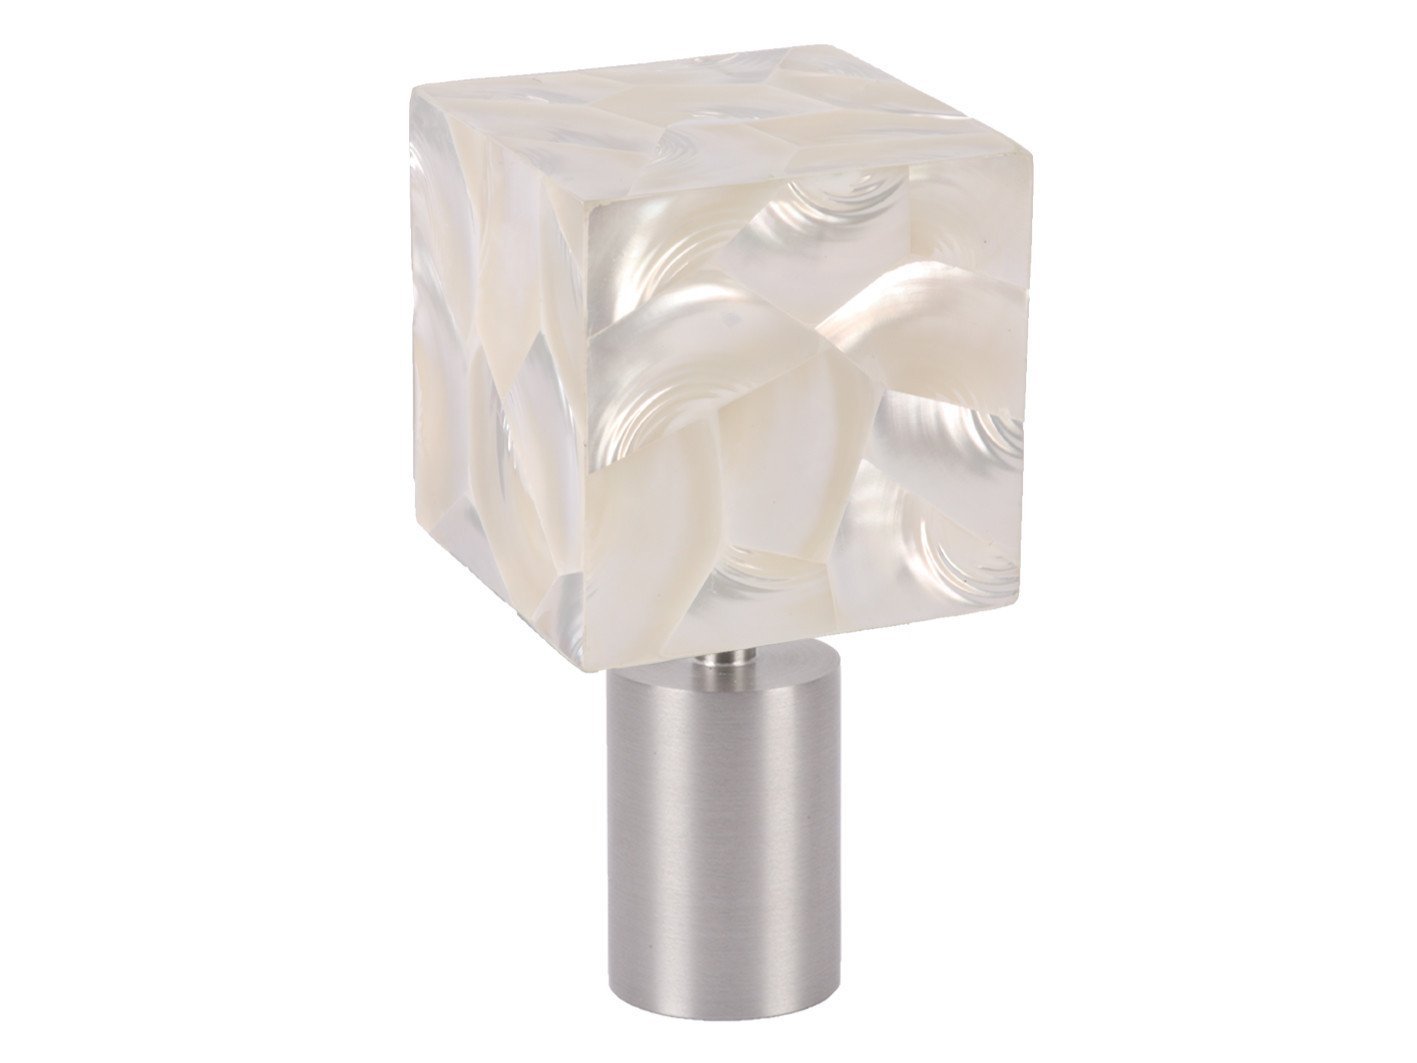 Designer curtain pole finial | Troca Satin white riva cube shell with steel plate